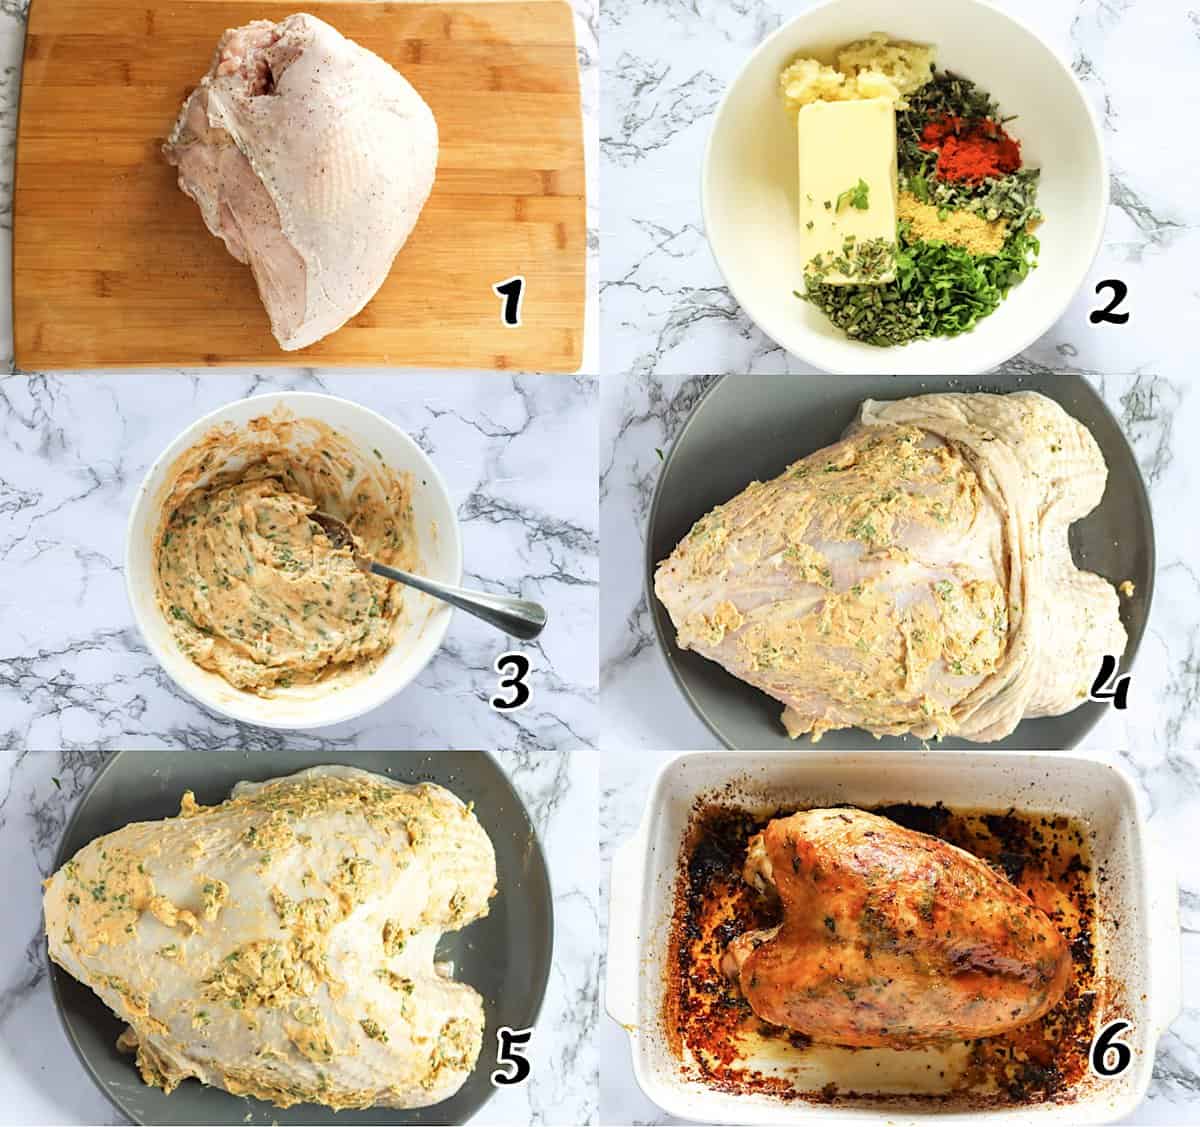 Make the herbed butter slather your poultry, and bake